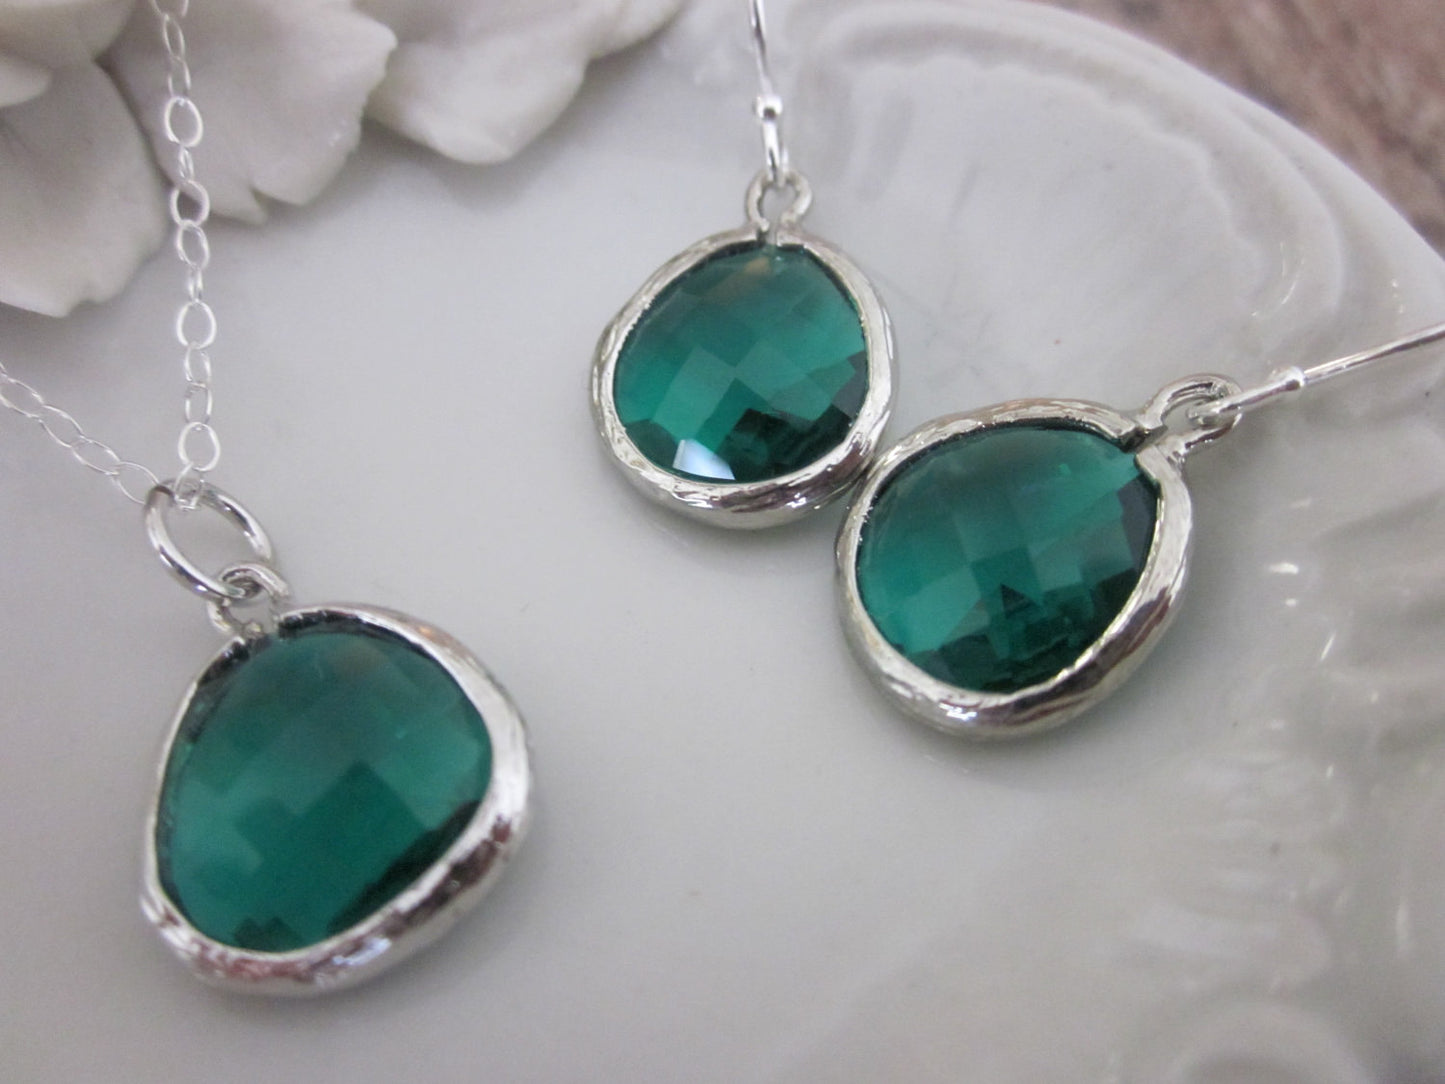 Necklace & Earring SET - EMERALD GREEN Glass Gem Pendants on Sterling Silver Earwires and Chain